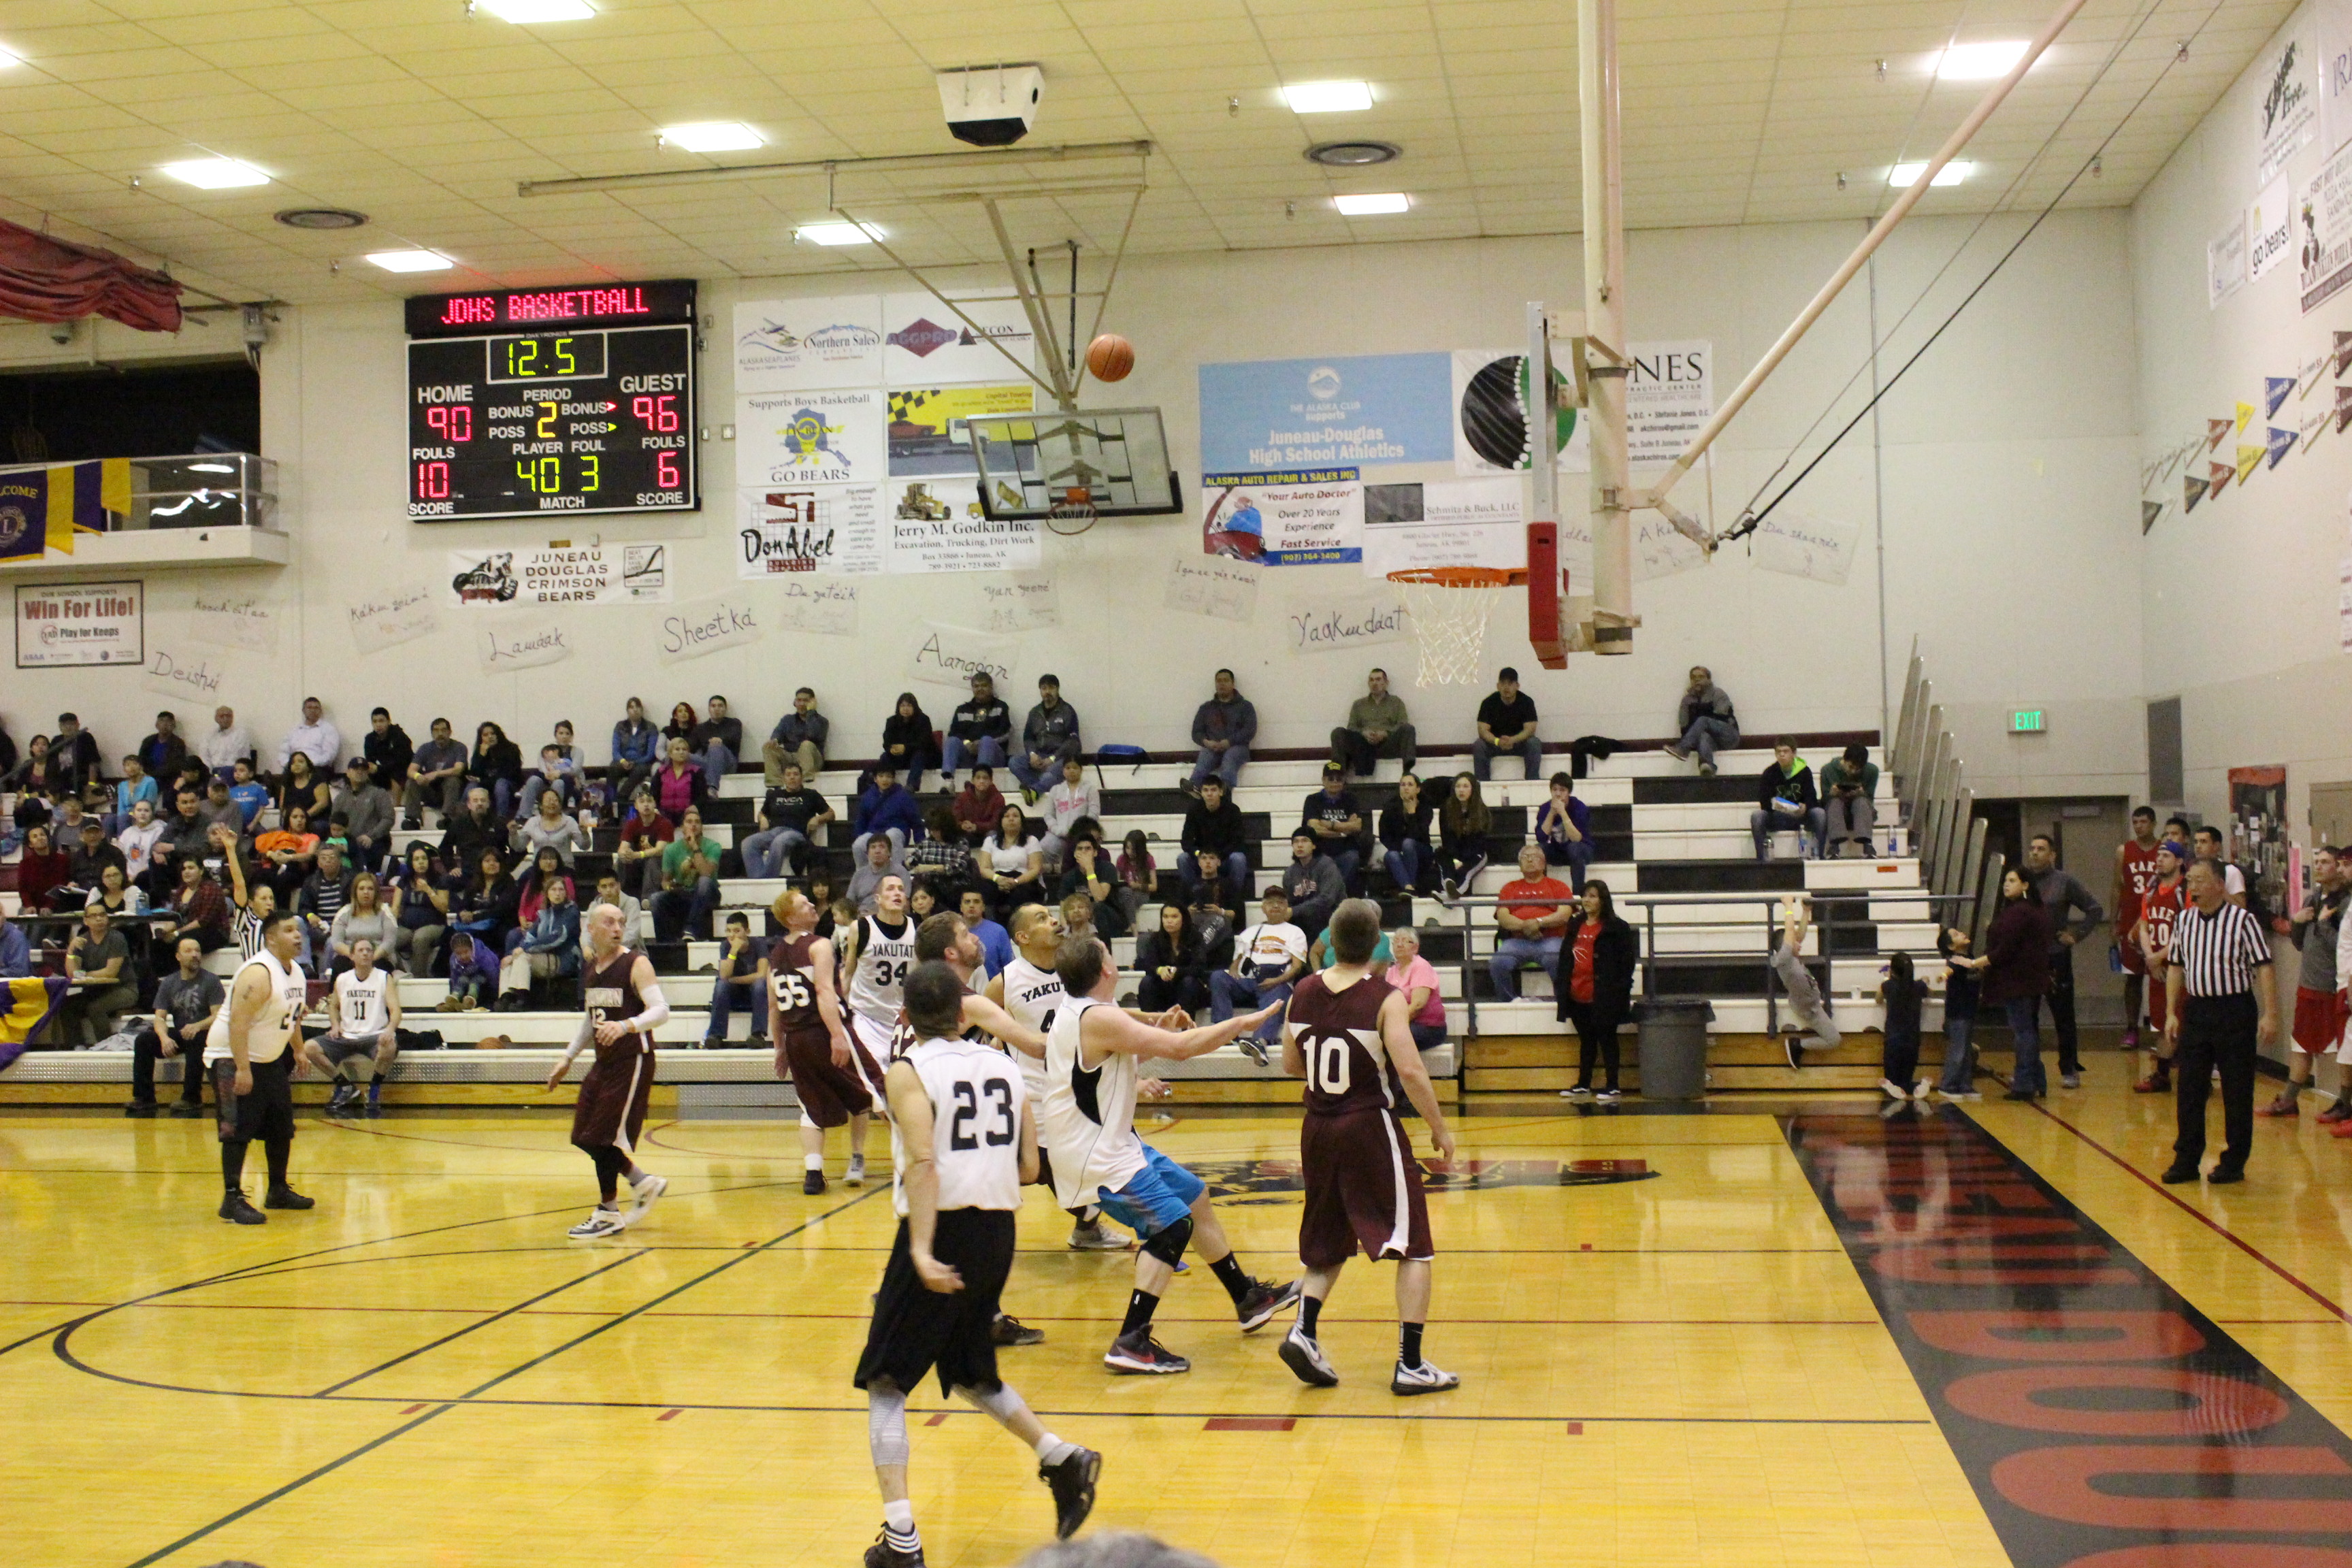 Yakutat faces off against Klukwan in Tuesday's game. (Photo by Elizabeth Jenkins/KTOO)